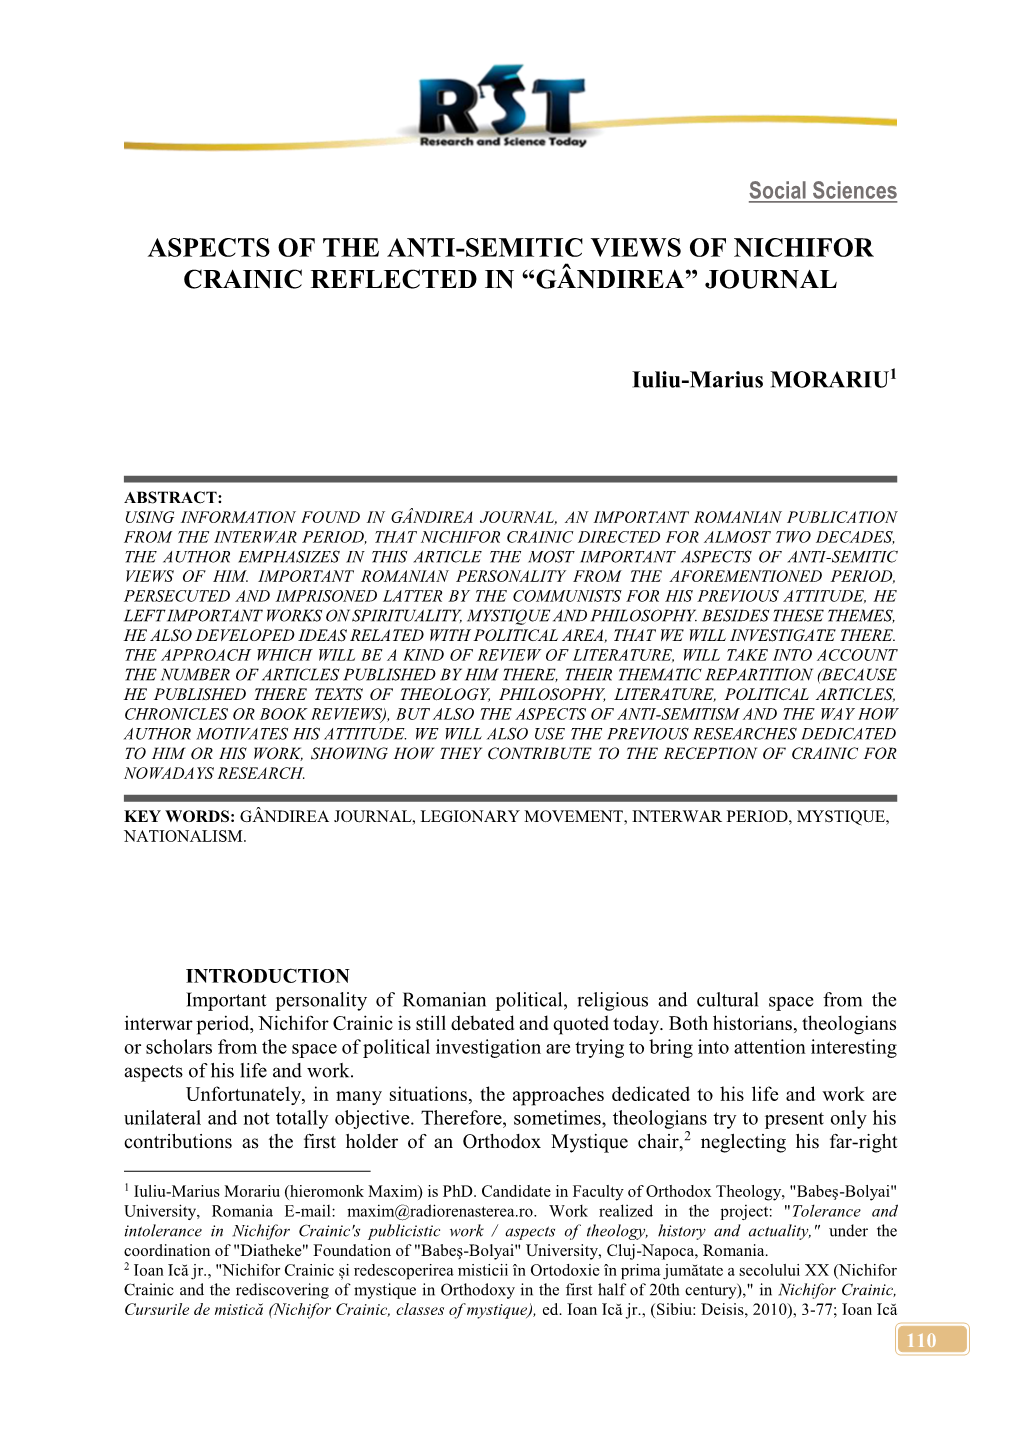 Aspects of the Anti-Semitic Views of Nichifor Crainic Reflected in “Gândirea” Journal